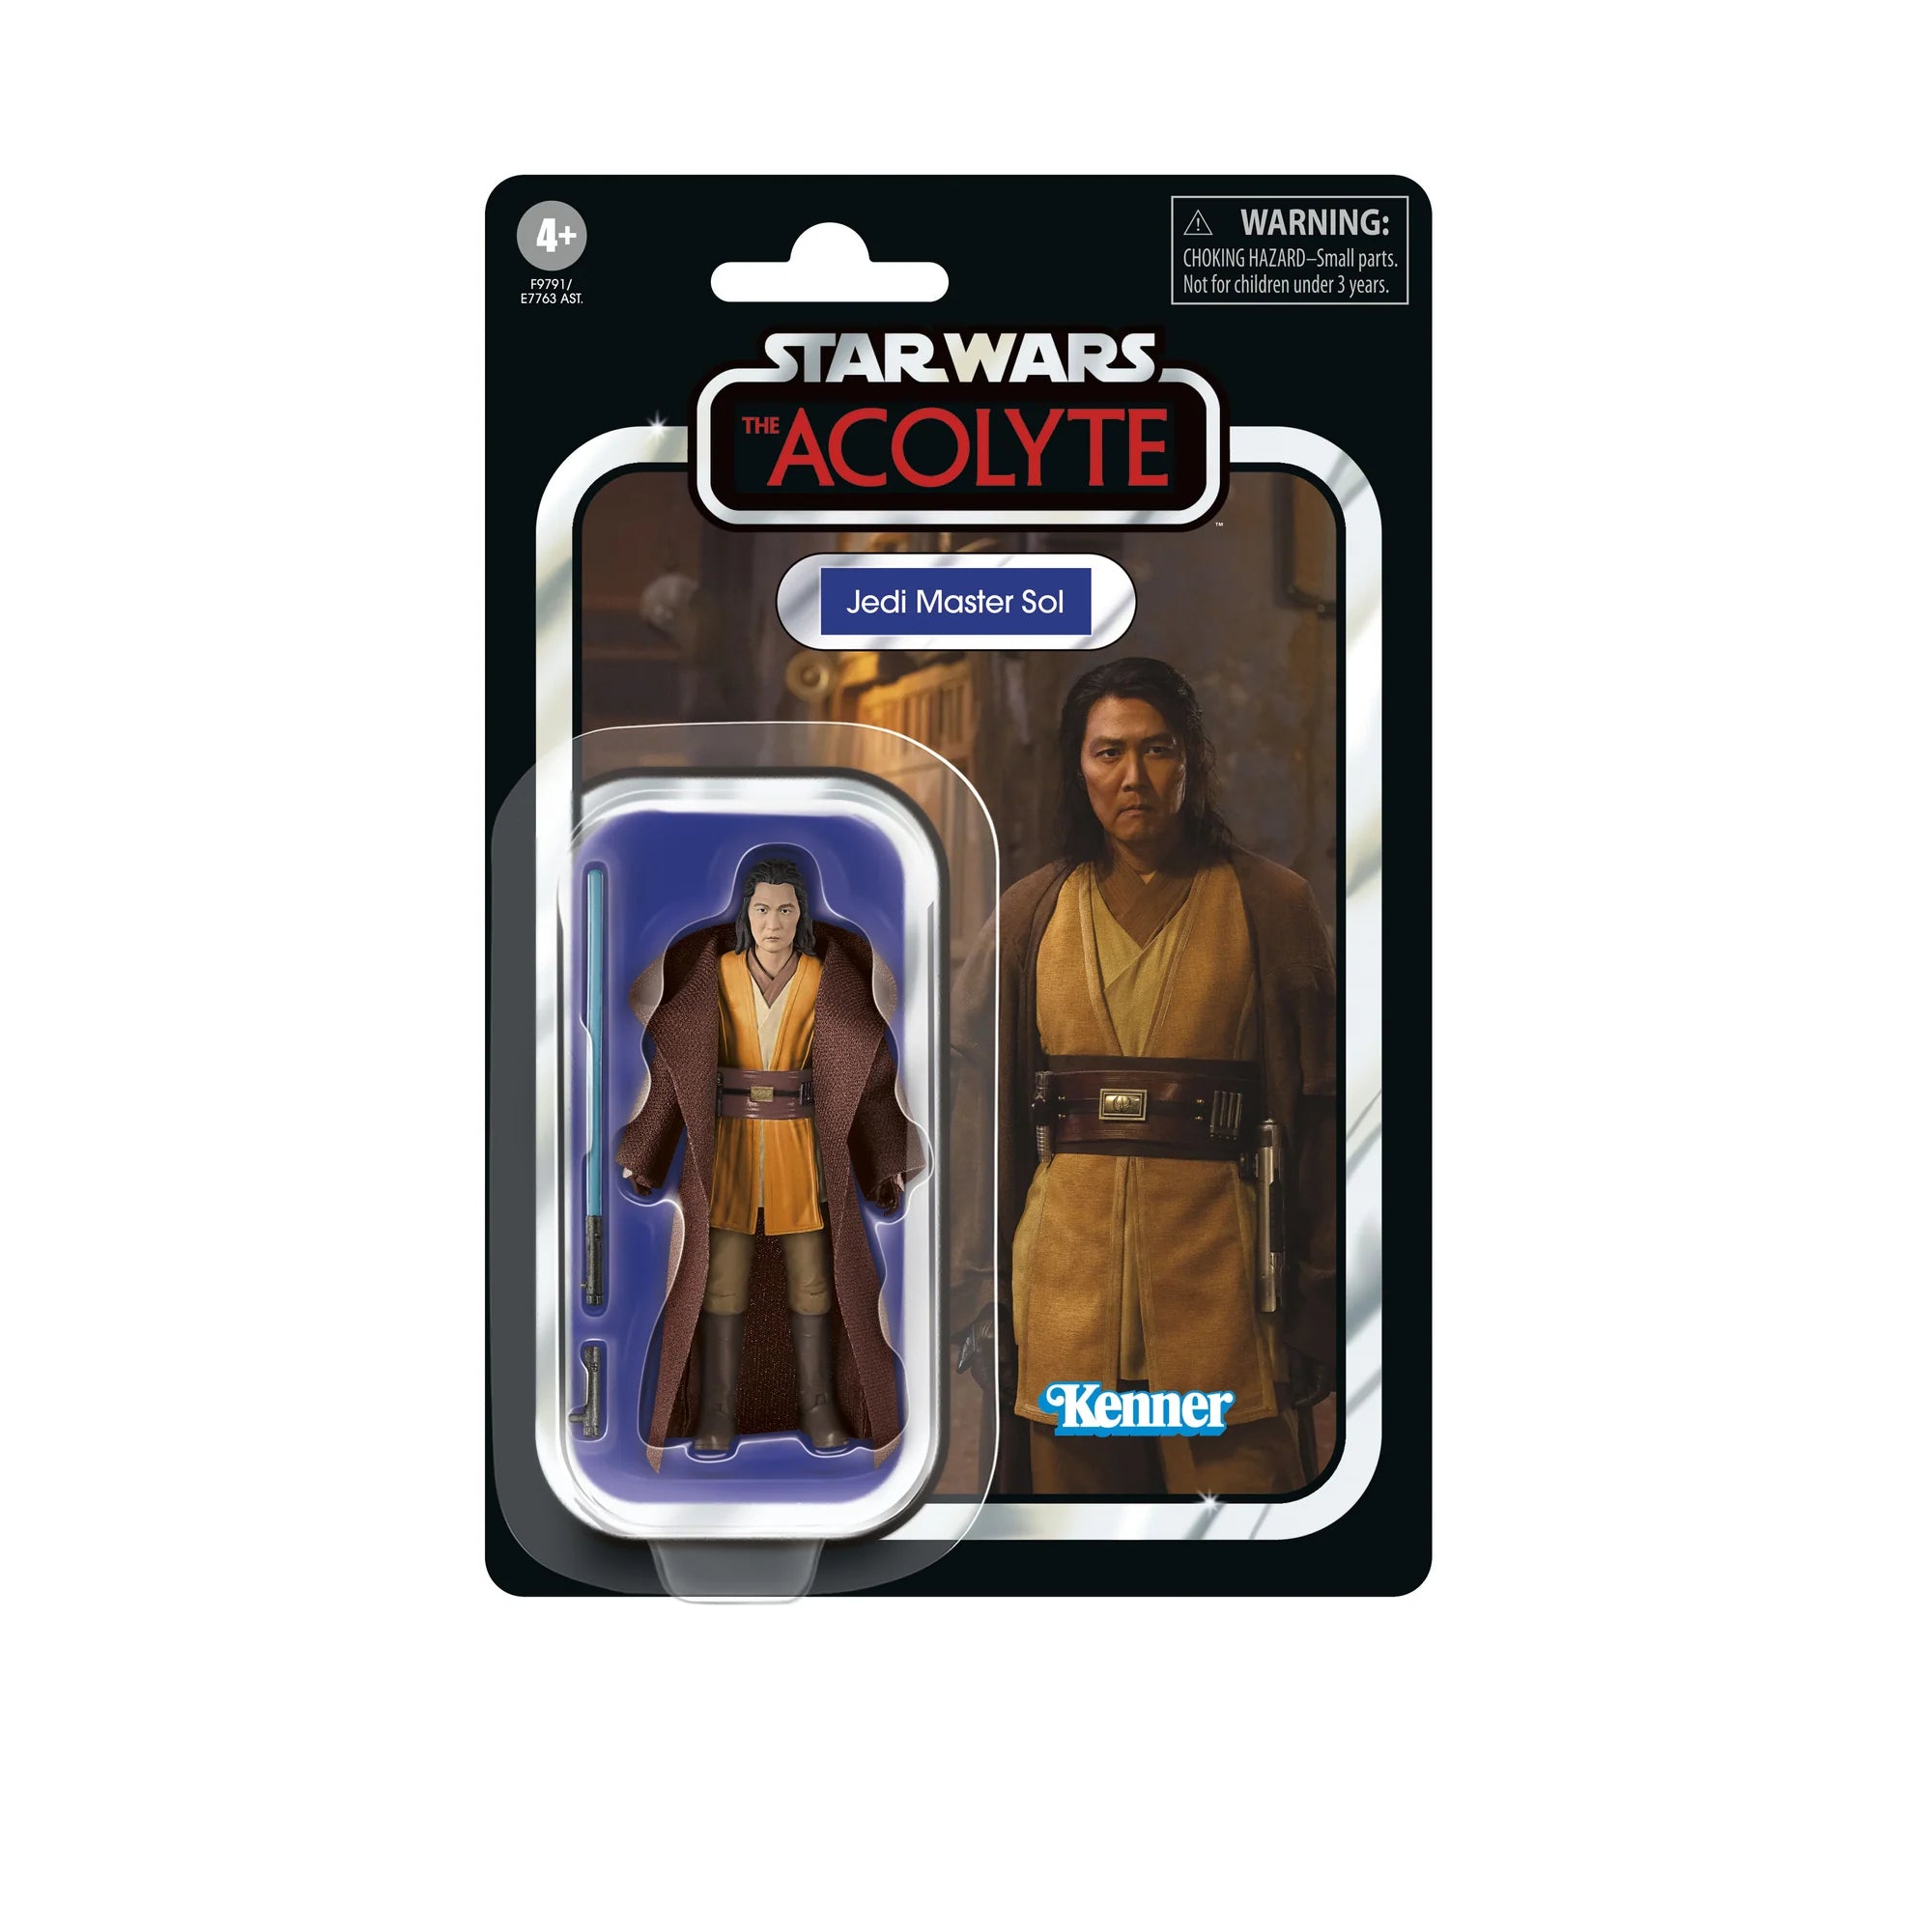 Star Wars The Vintage Collection: The Acolyte - Jedi Master Sol